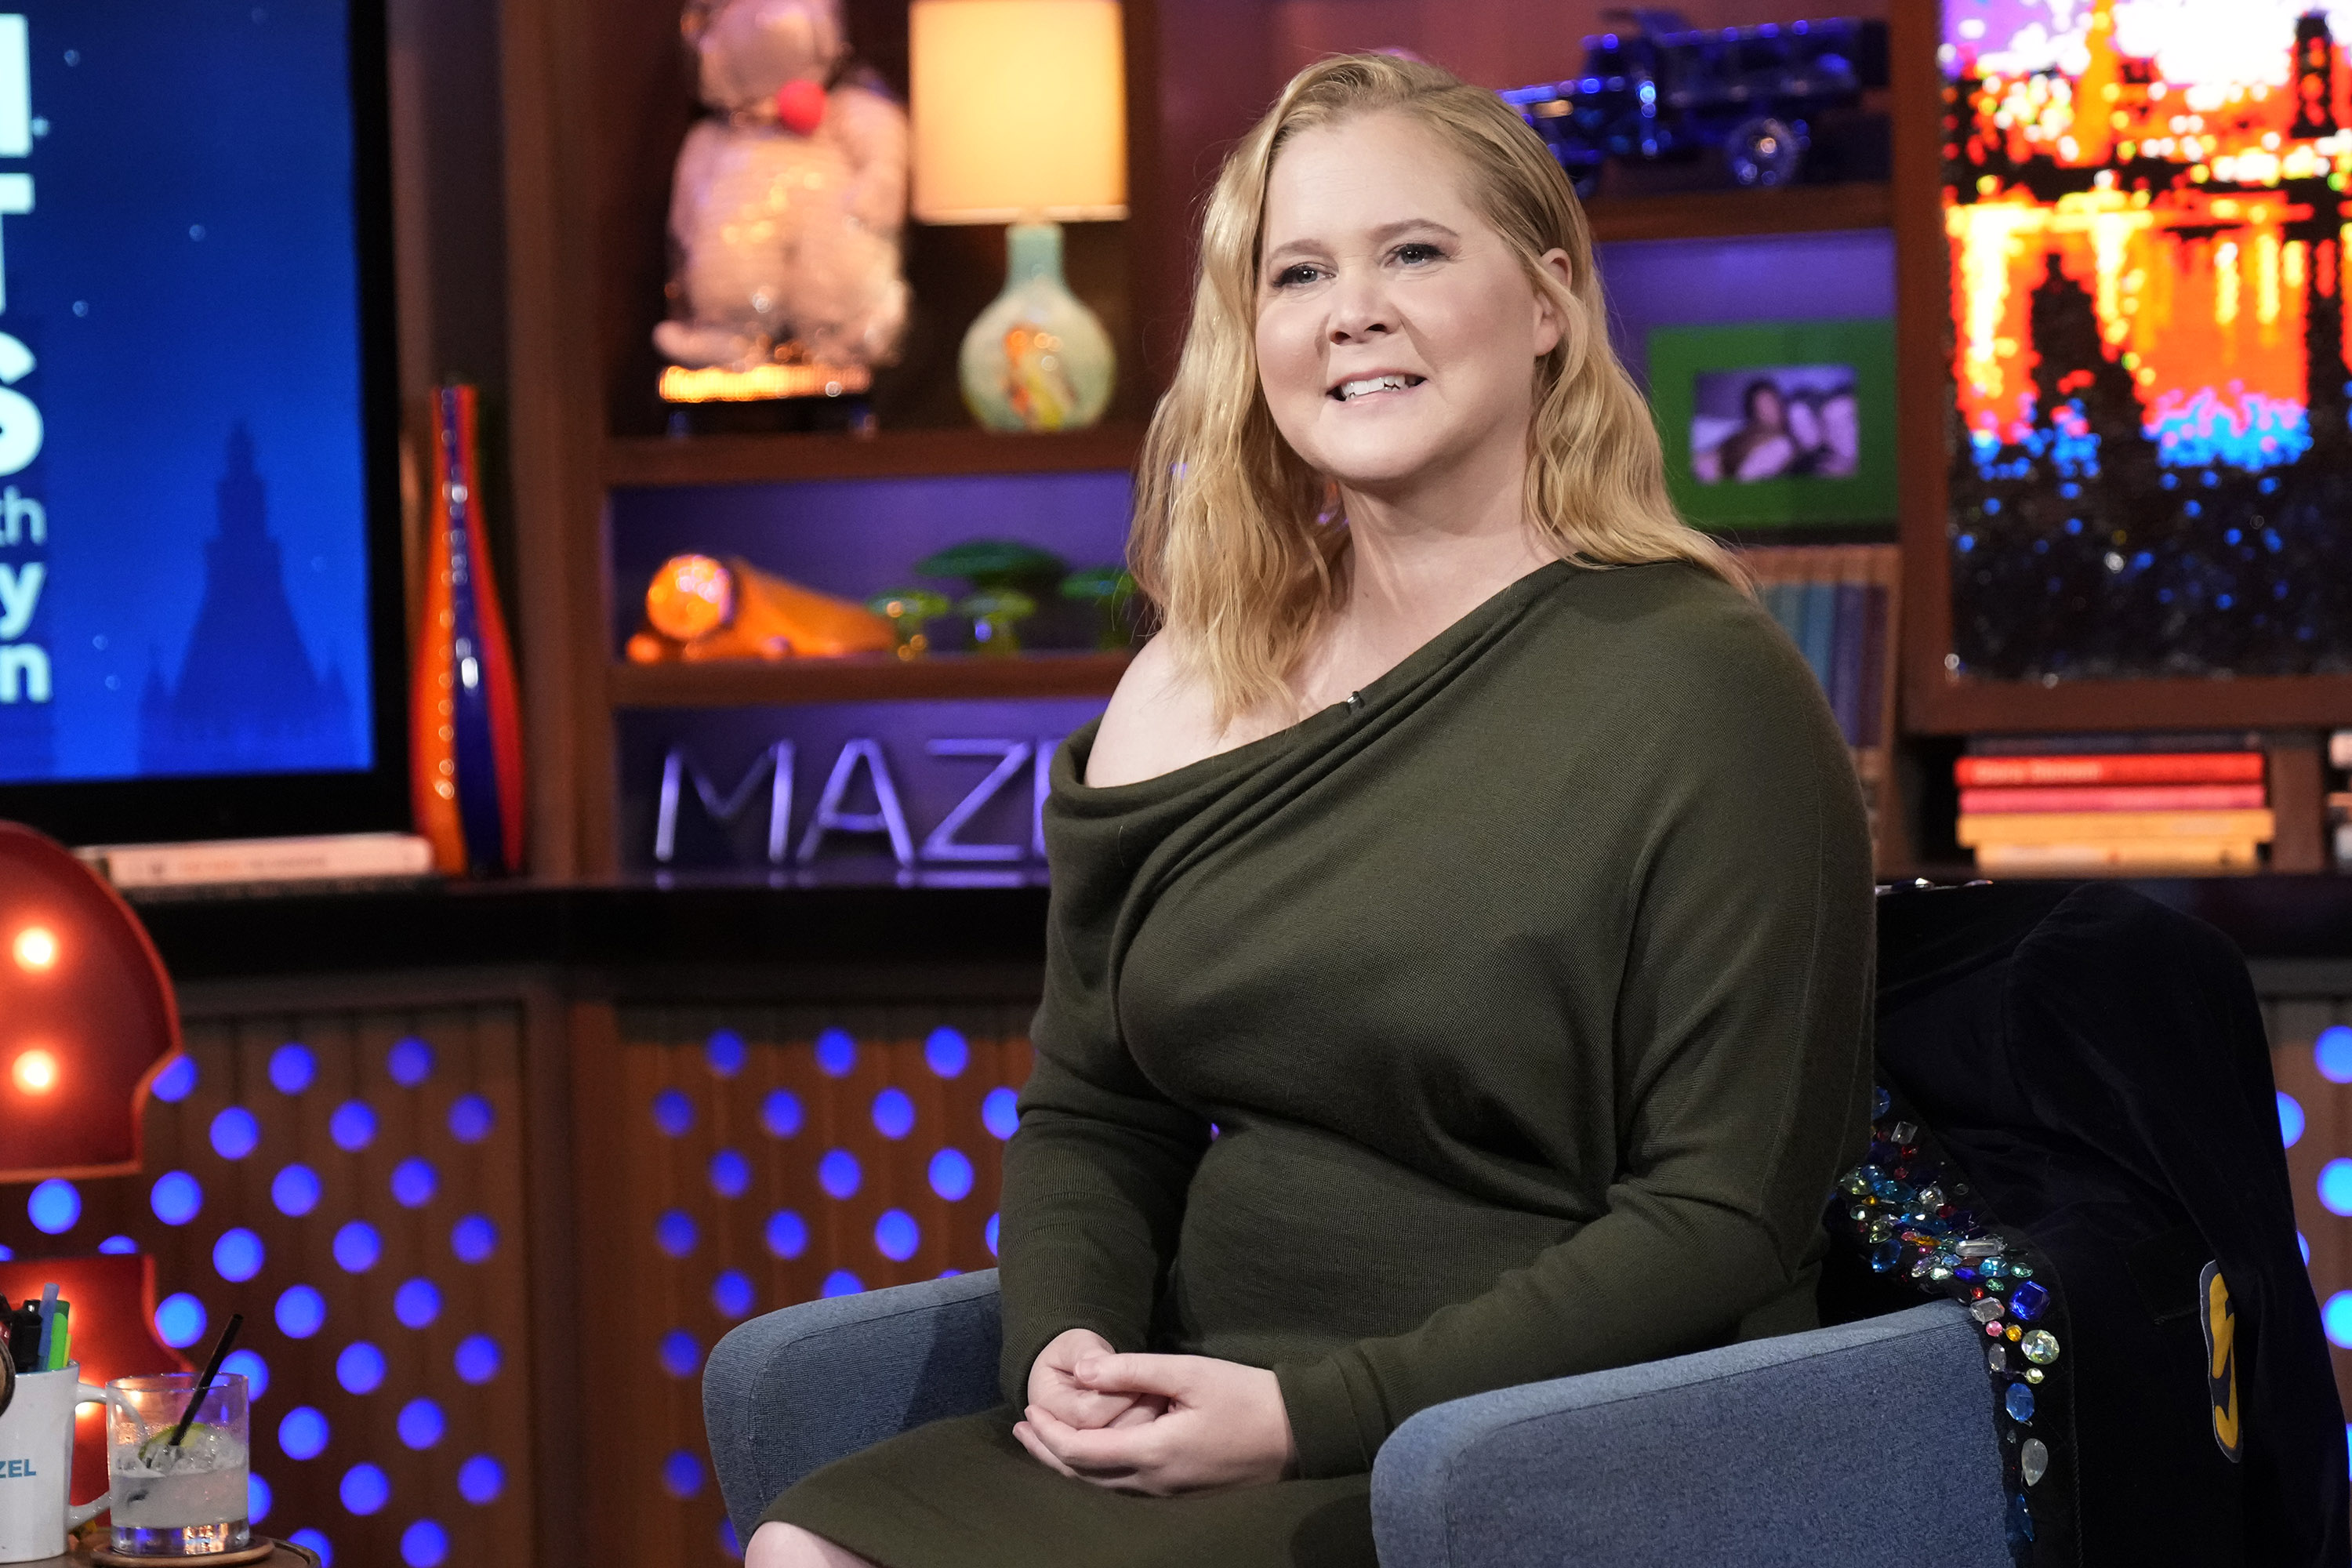 Amy Schumer on an episode of "Watch What Happens Live with Andy Cohen" in 2023. | Source: Getty Images